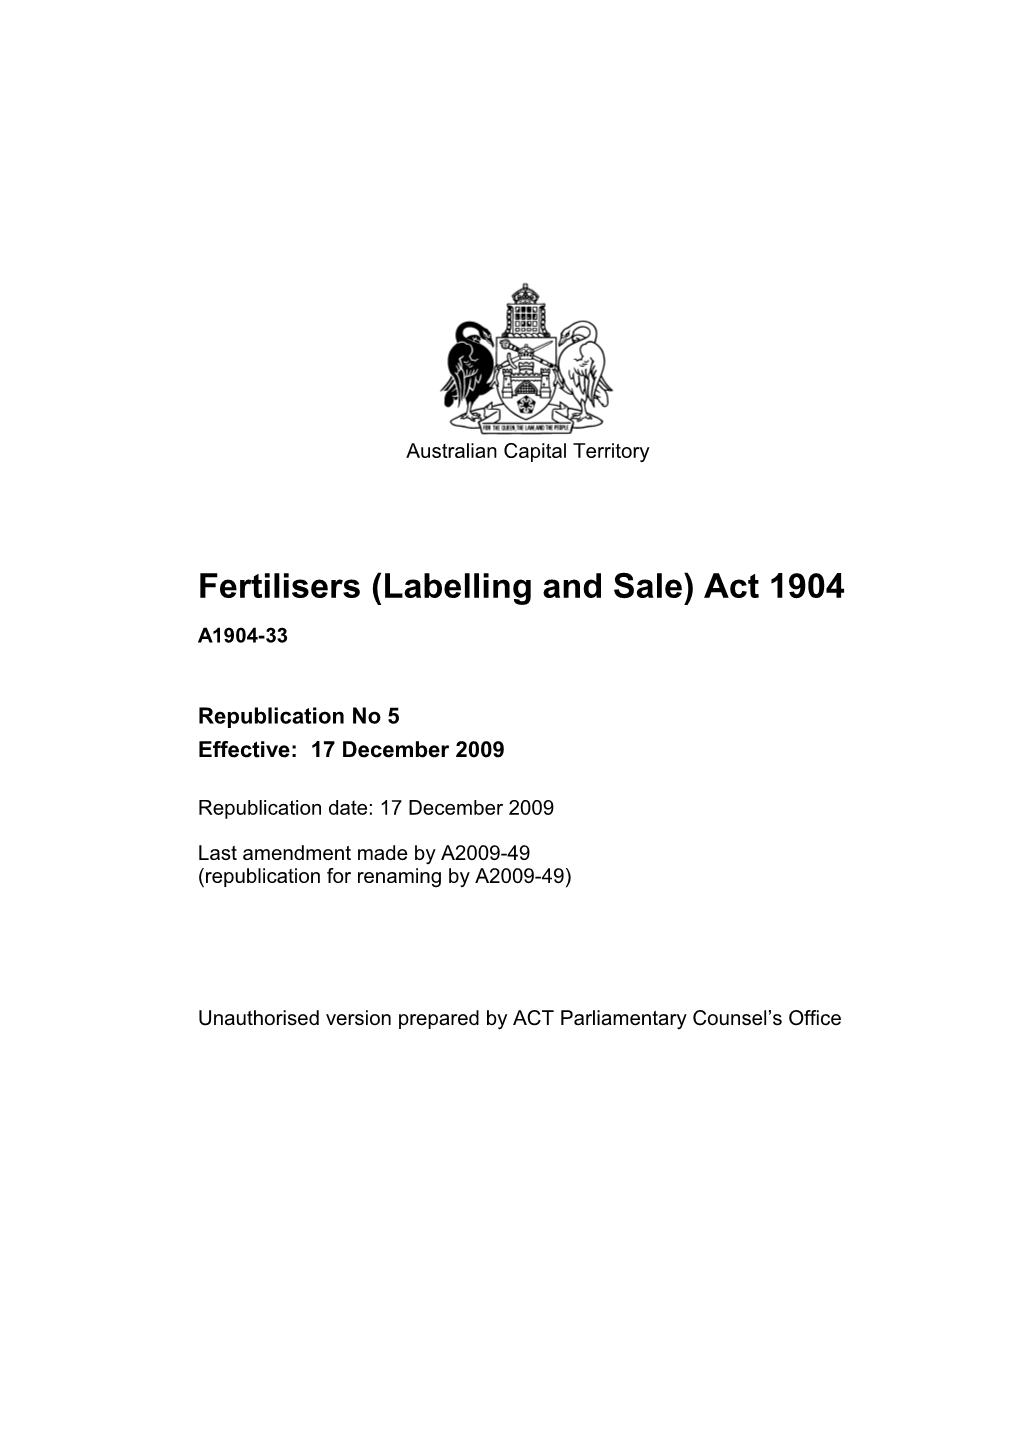 Fertilisers (Labelling and Sale) Act 1904